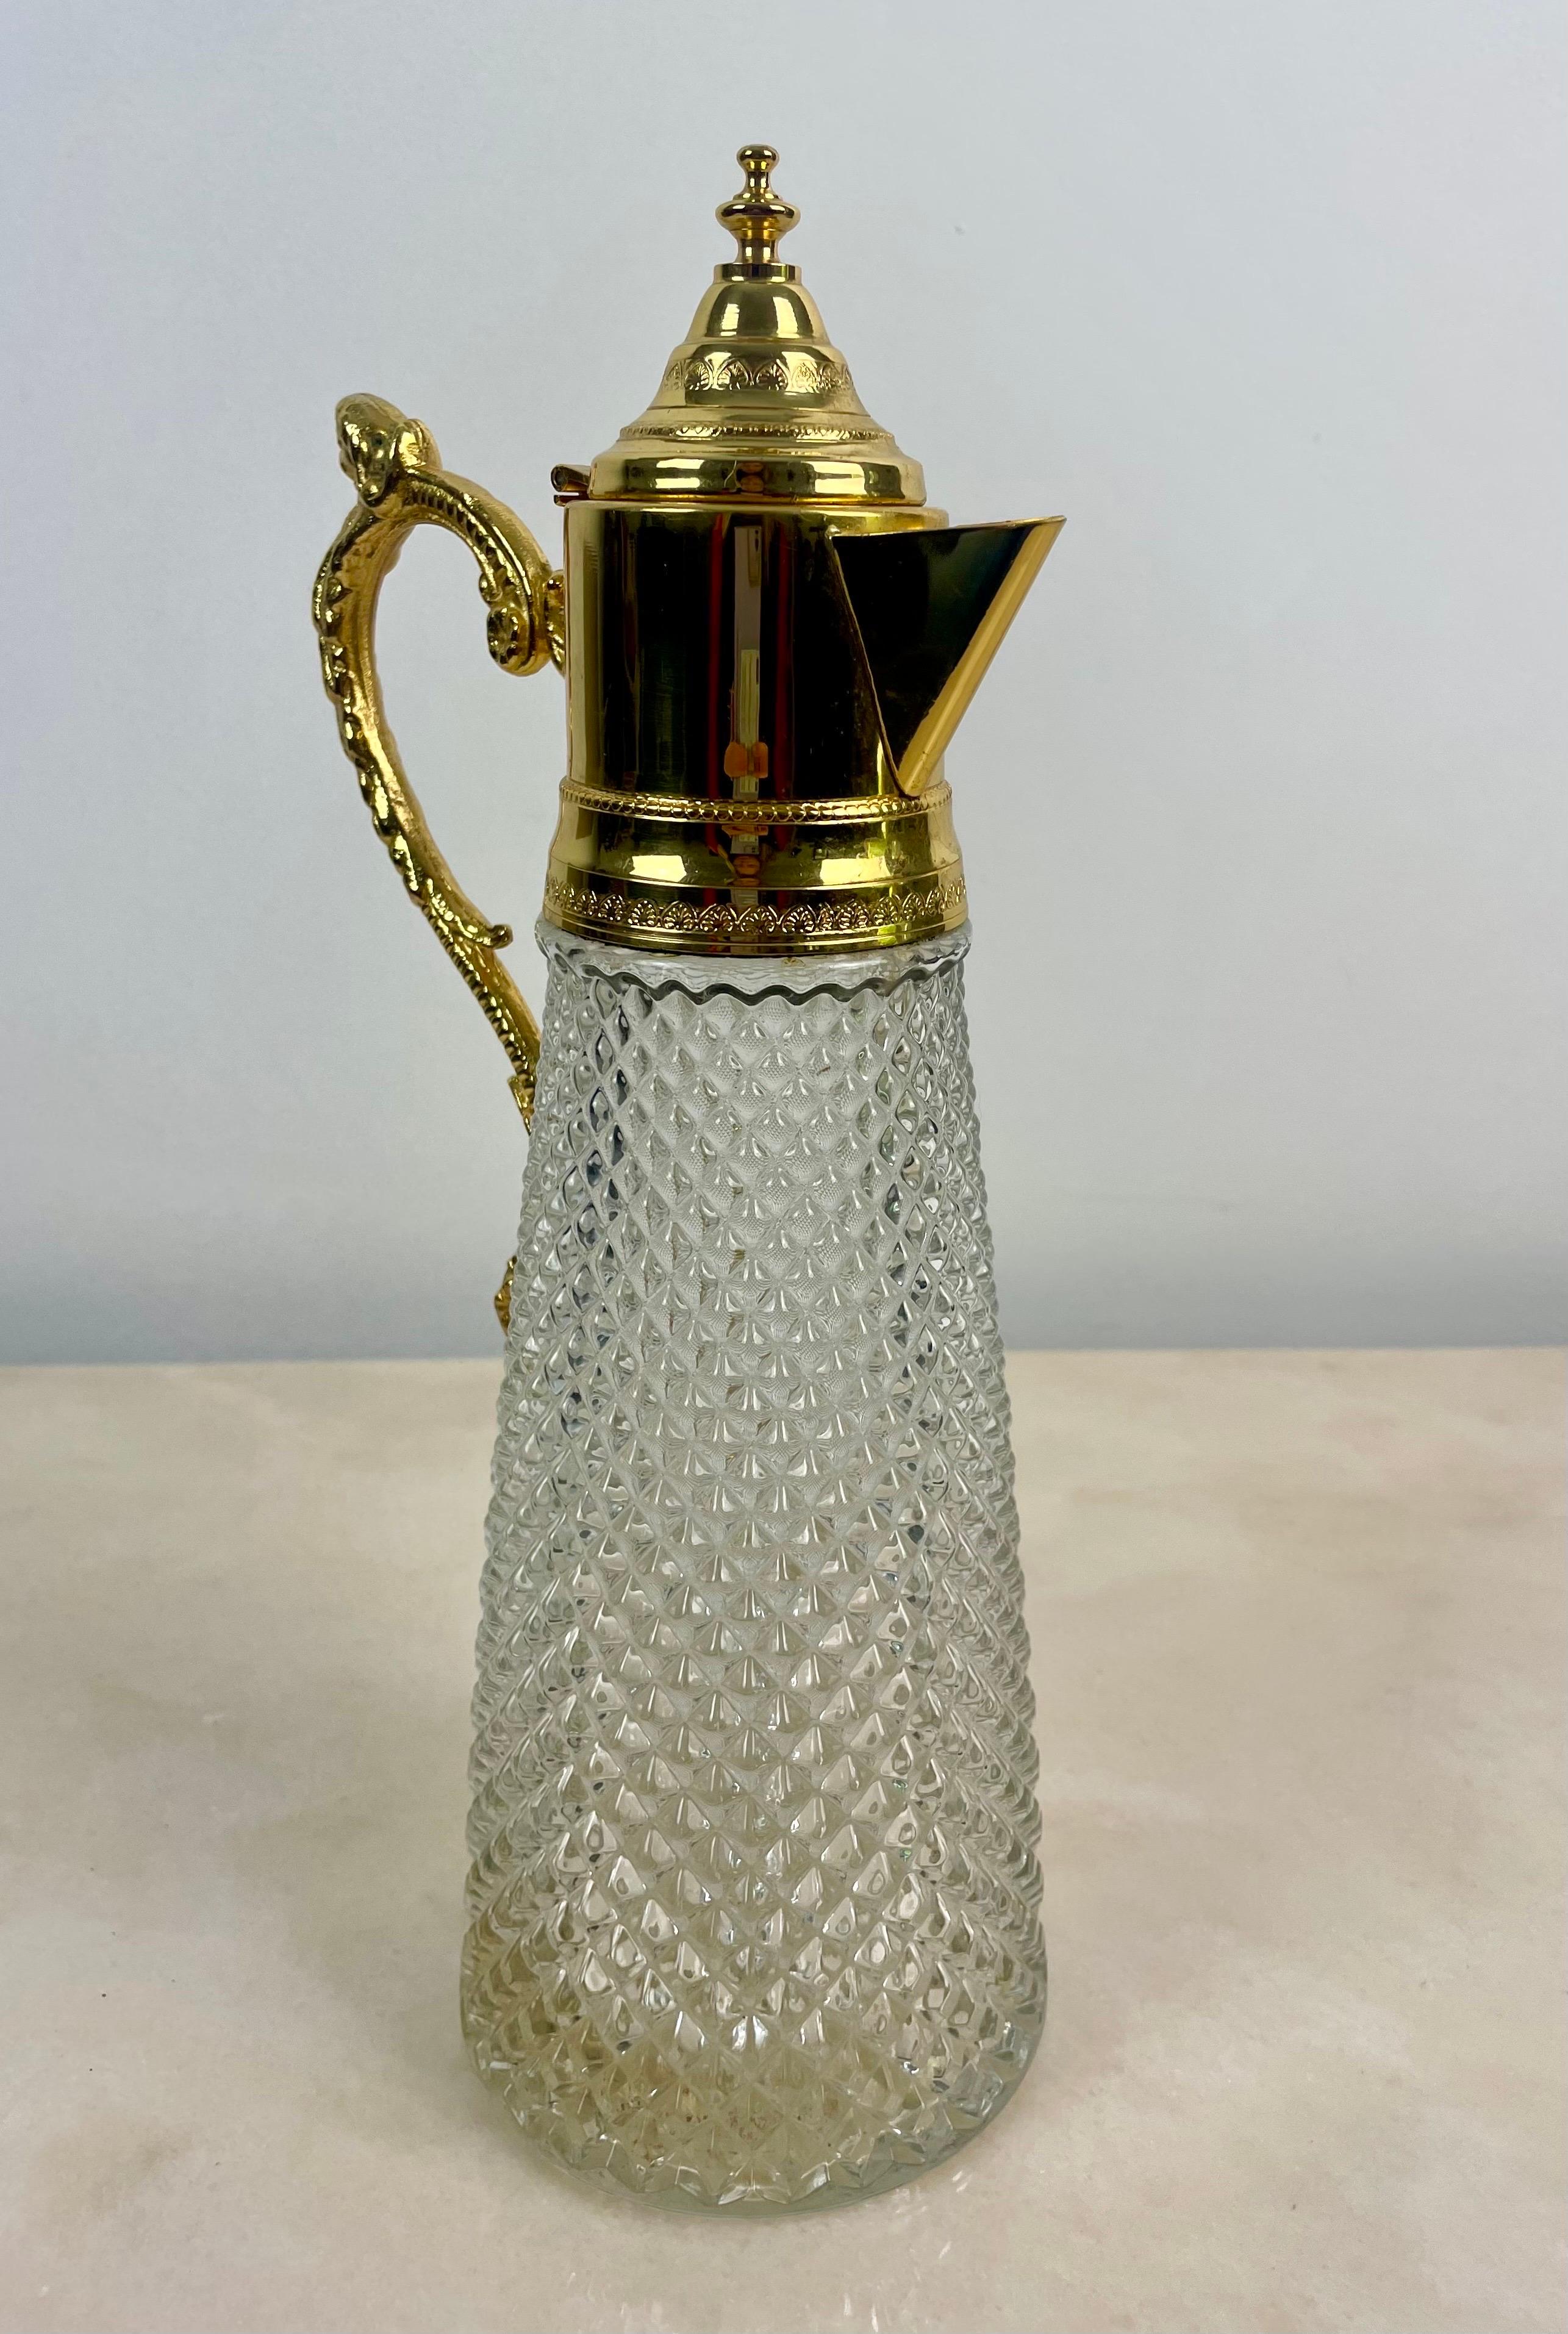 Sublime ewer jug in crystal and gilded metal. Art Deco.
The Crystal is cut in a diamond point which gives this
Jug carafe a very refined style.
The diamond point crystal is indeed very elegant.
Very nice work on the curves of the golden frame, of